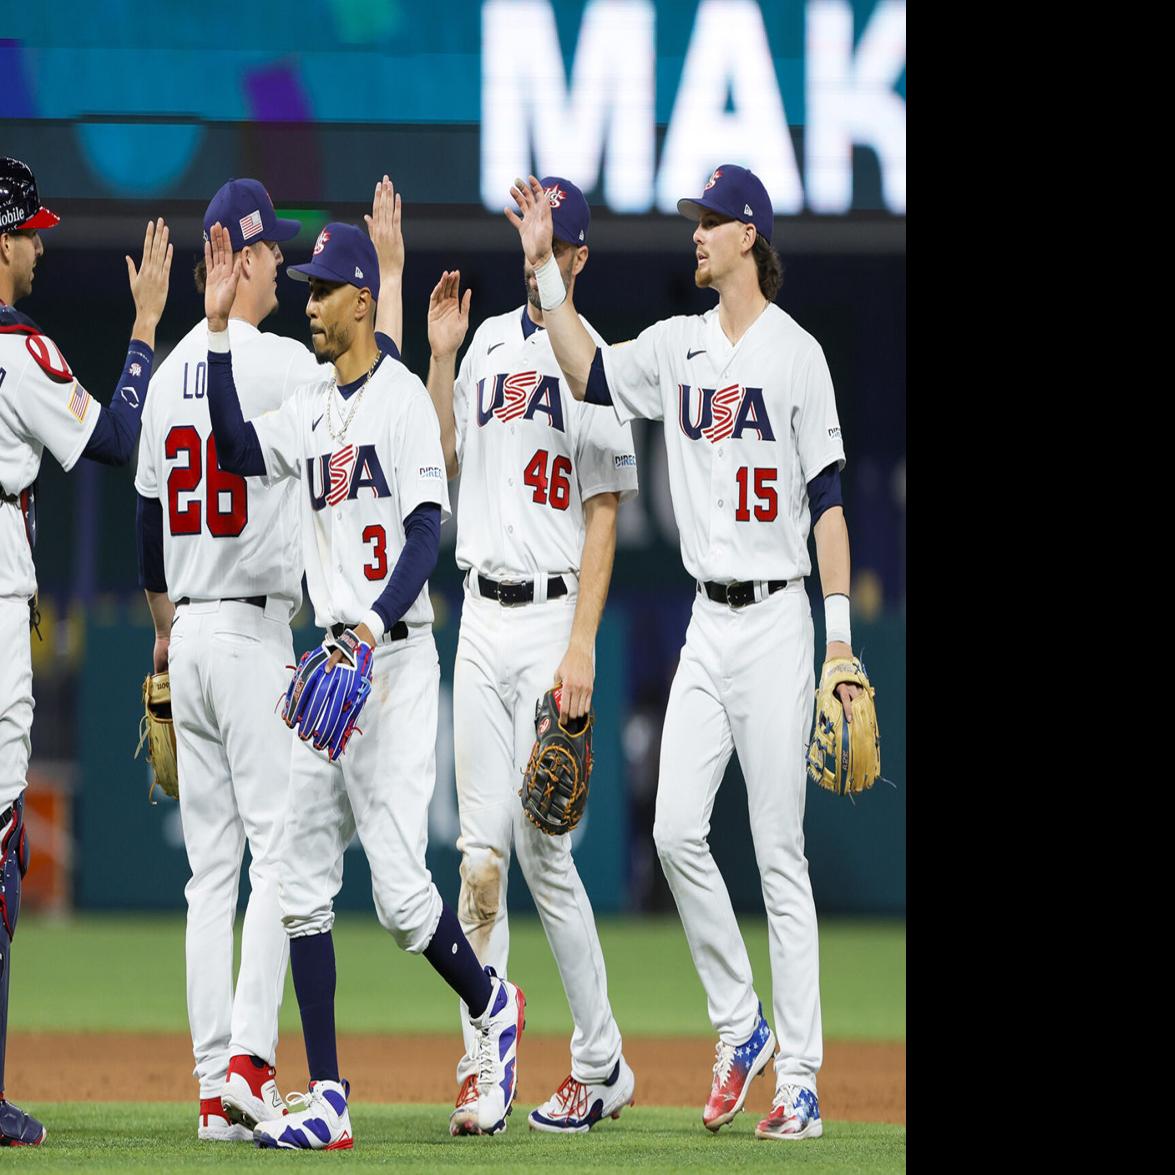 Who is the wife of Trea Turner, the Philadelphia Phillies star who has led  the USA to the WBC finals?